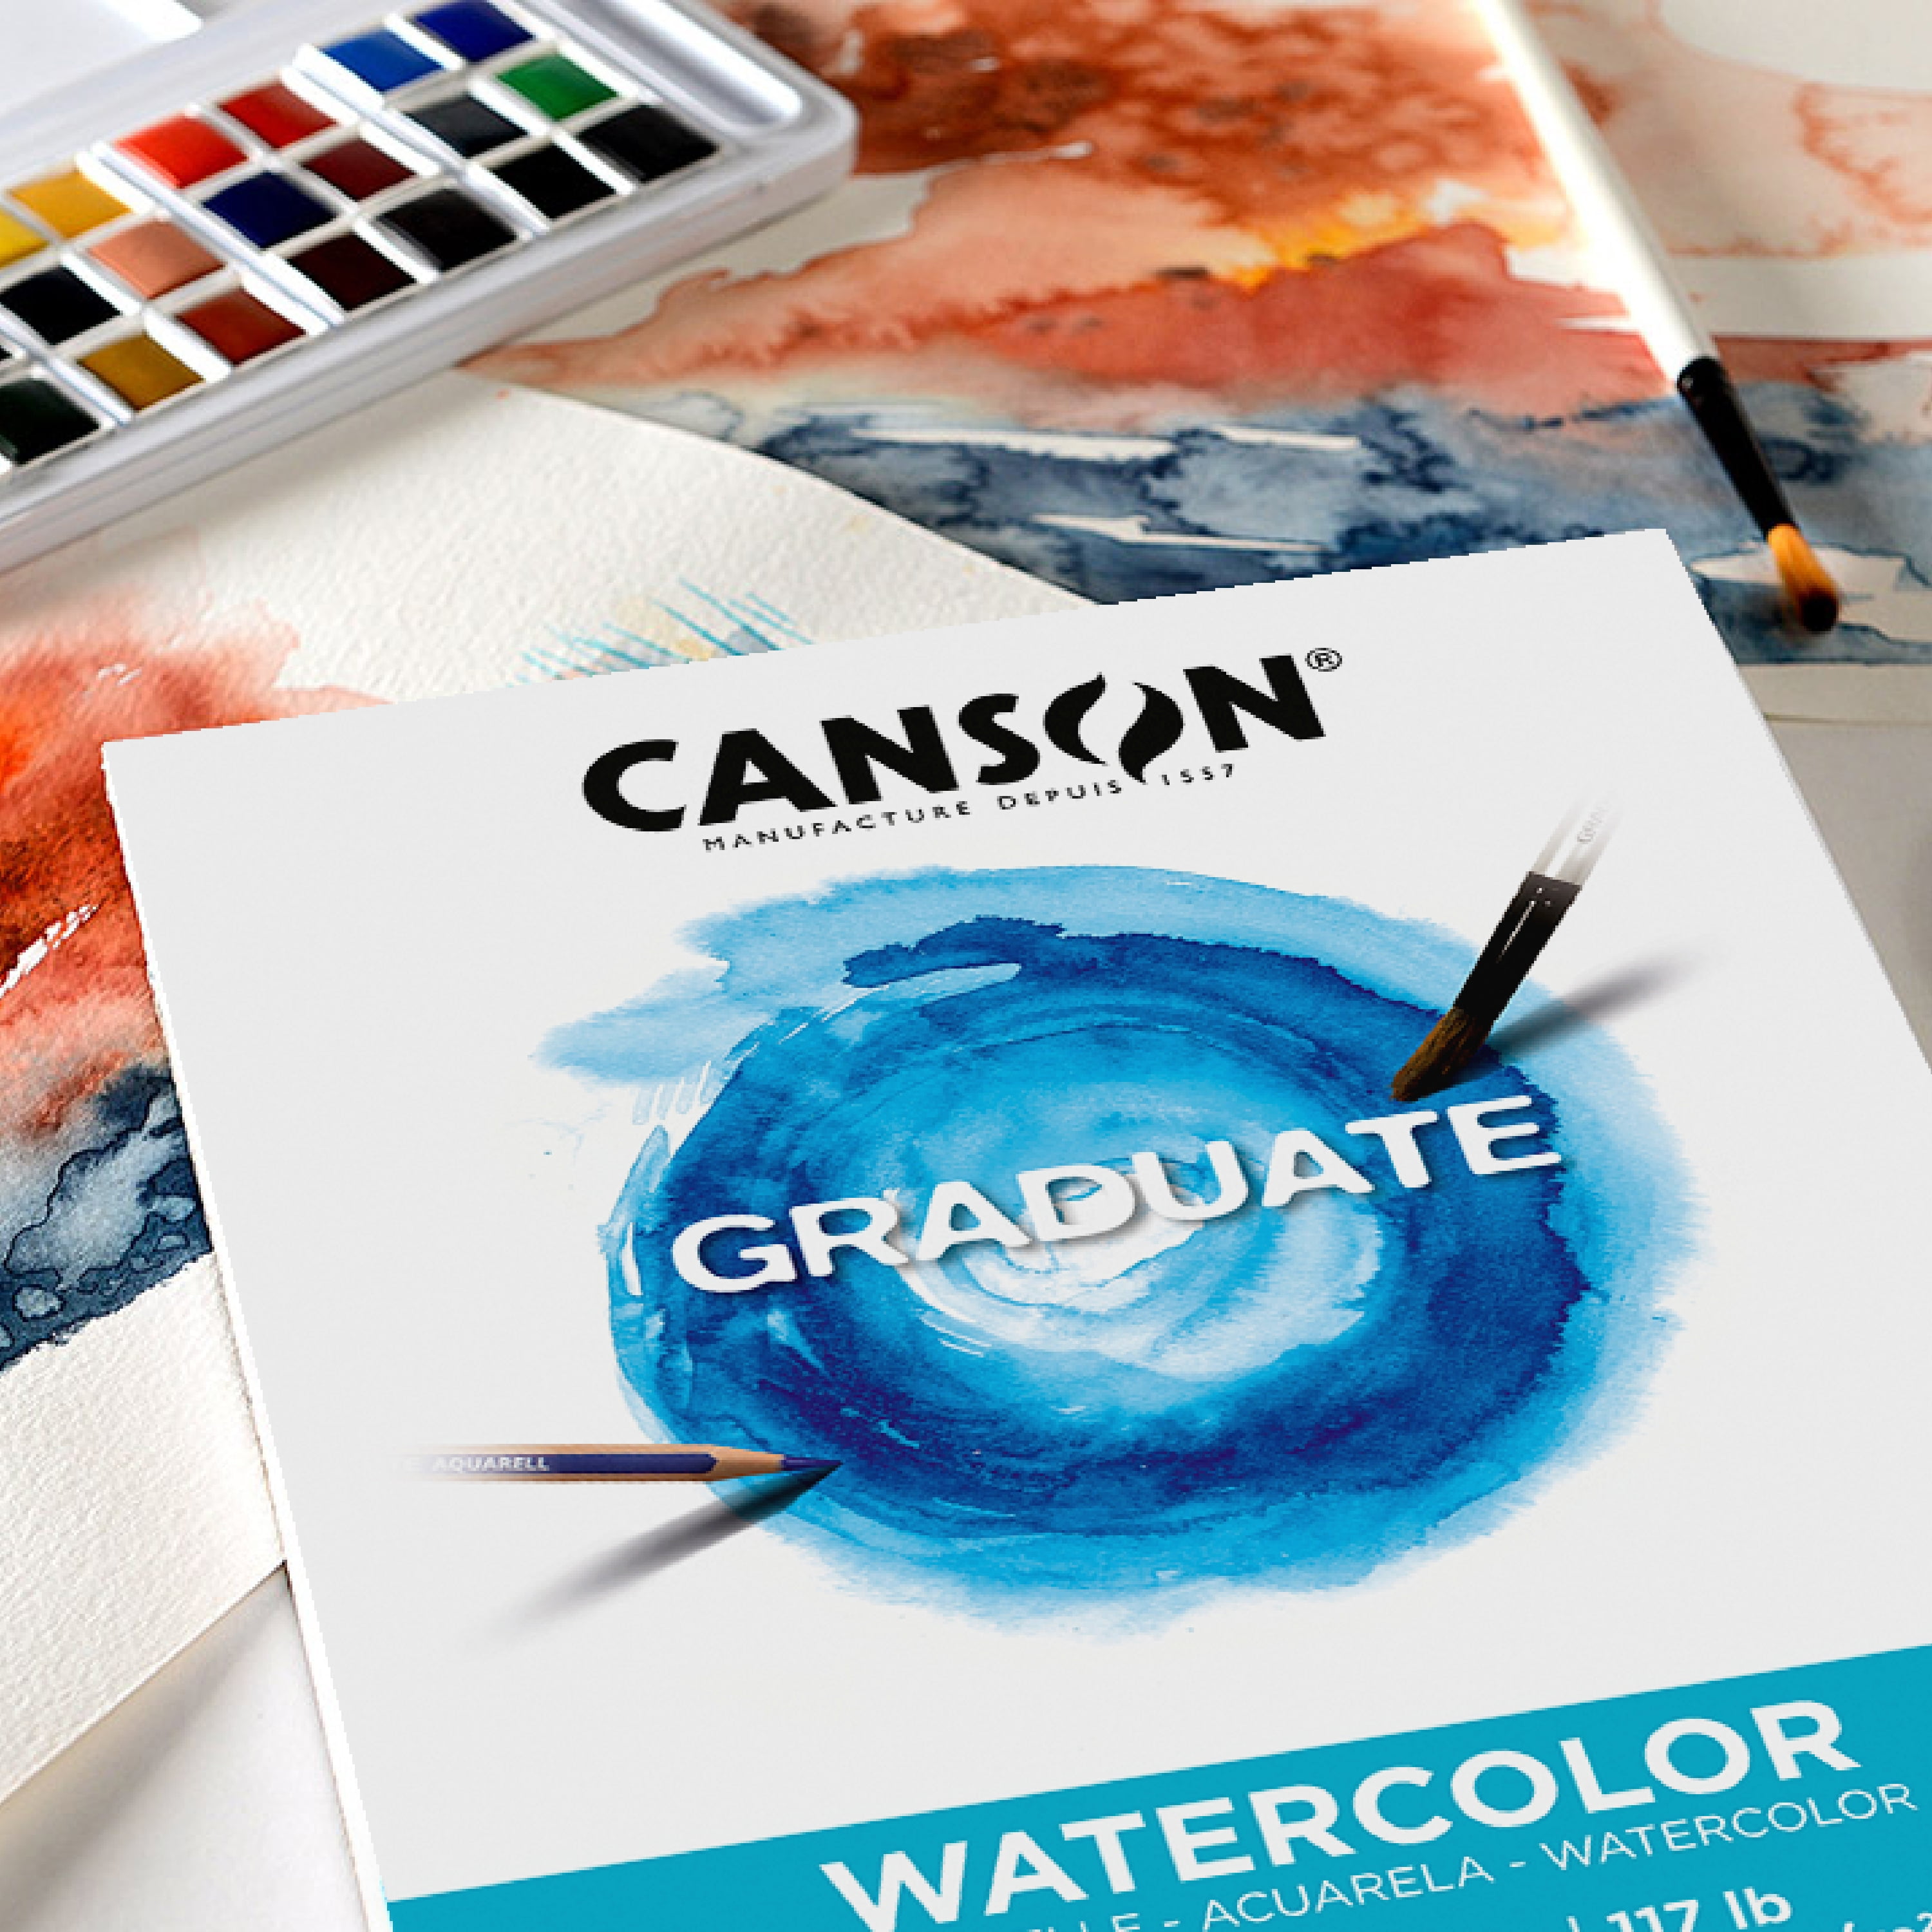 Canson Artist Series Watercolor Paper, Wirebound Pad, 9x20 inches, 20  Sheets (140lb/300g) - Artist Paper for Adults and Students - Watercolors,  Mixed